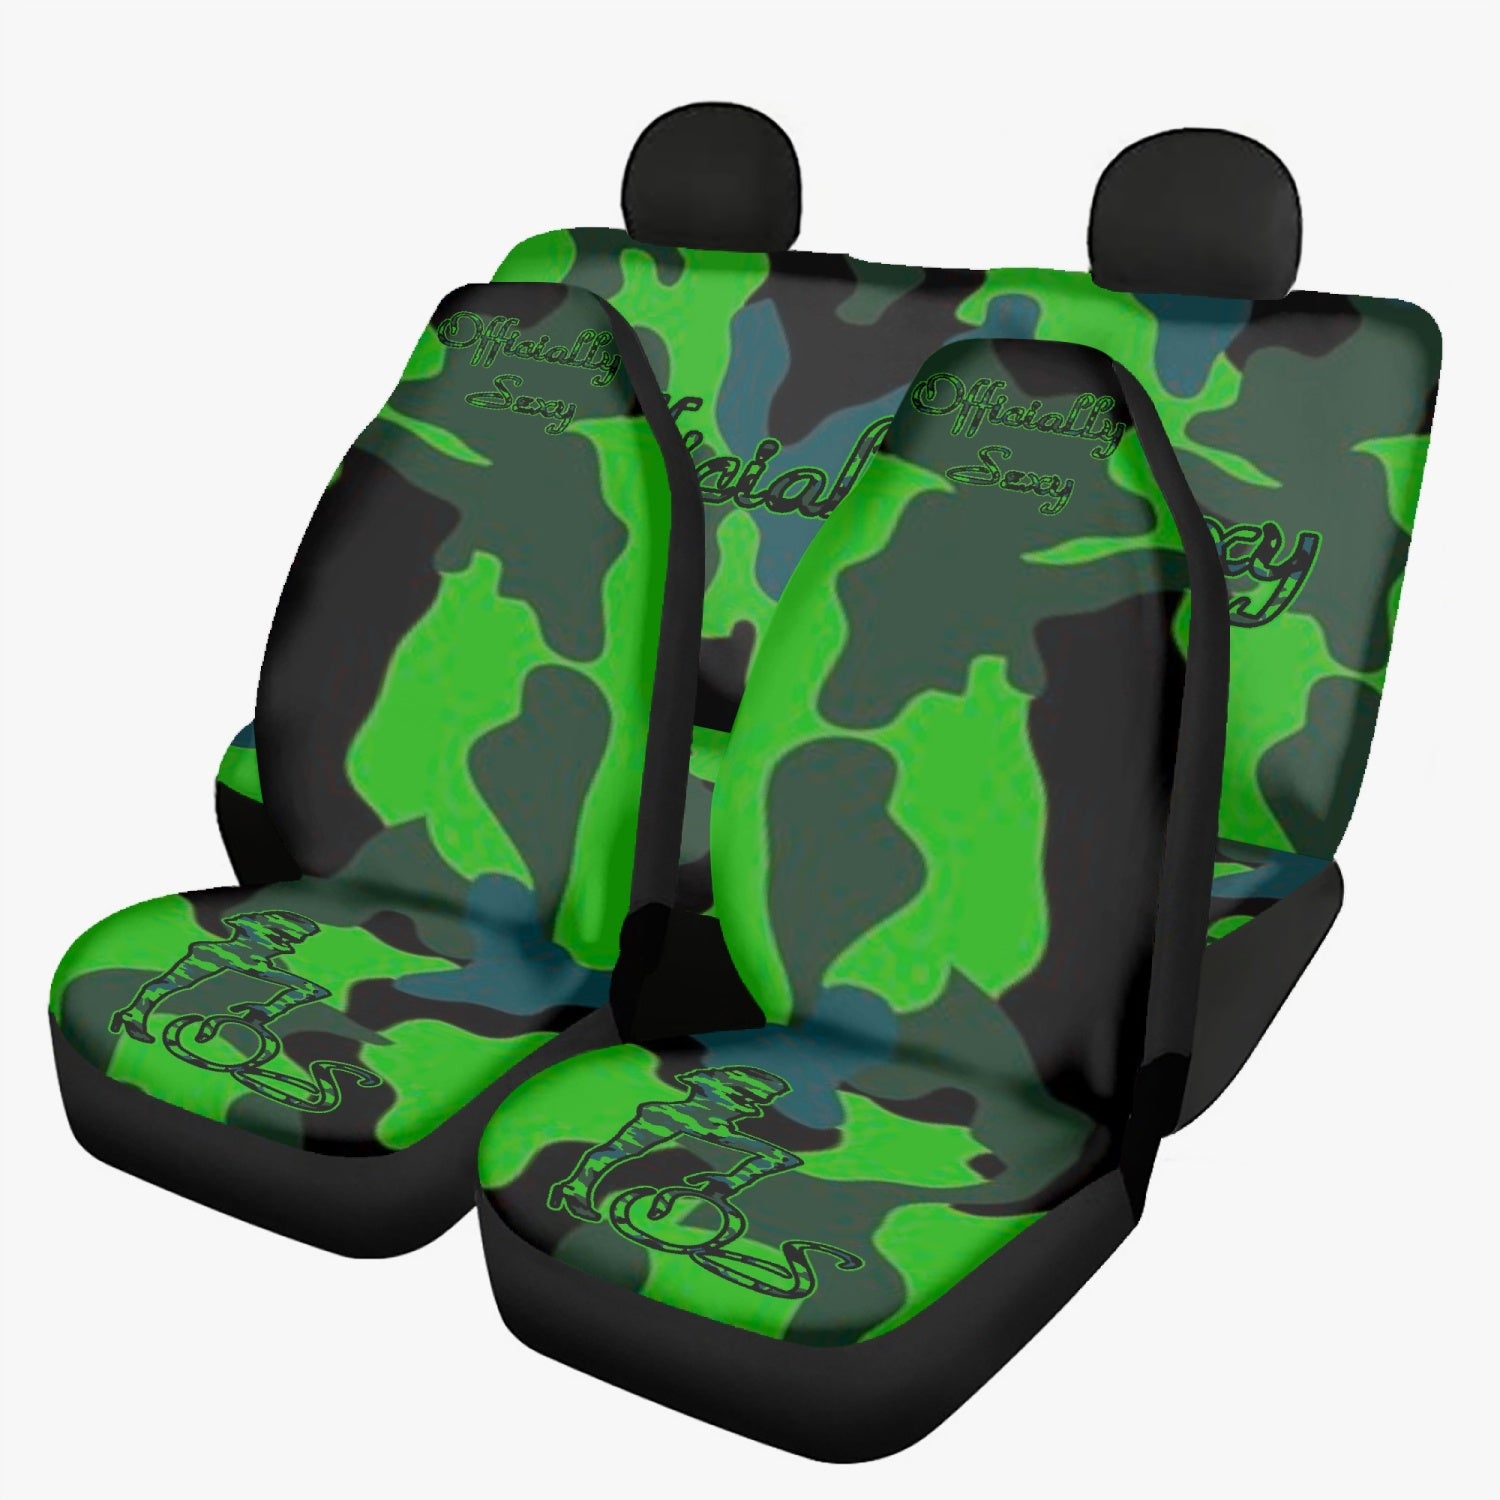 Officially Sexy Green Army Camouflage Collection Microfiber Car Seat Covers - 3Pcs